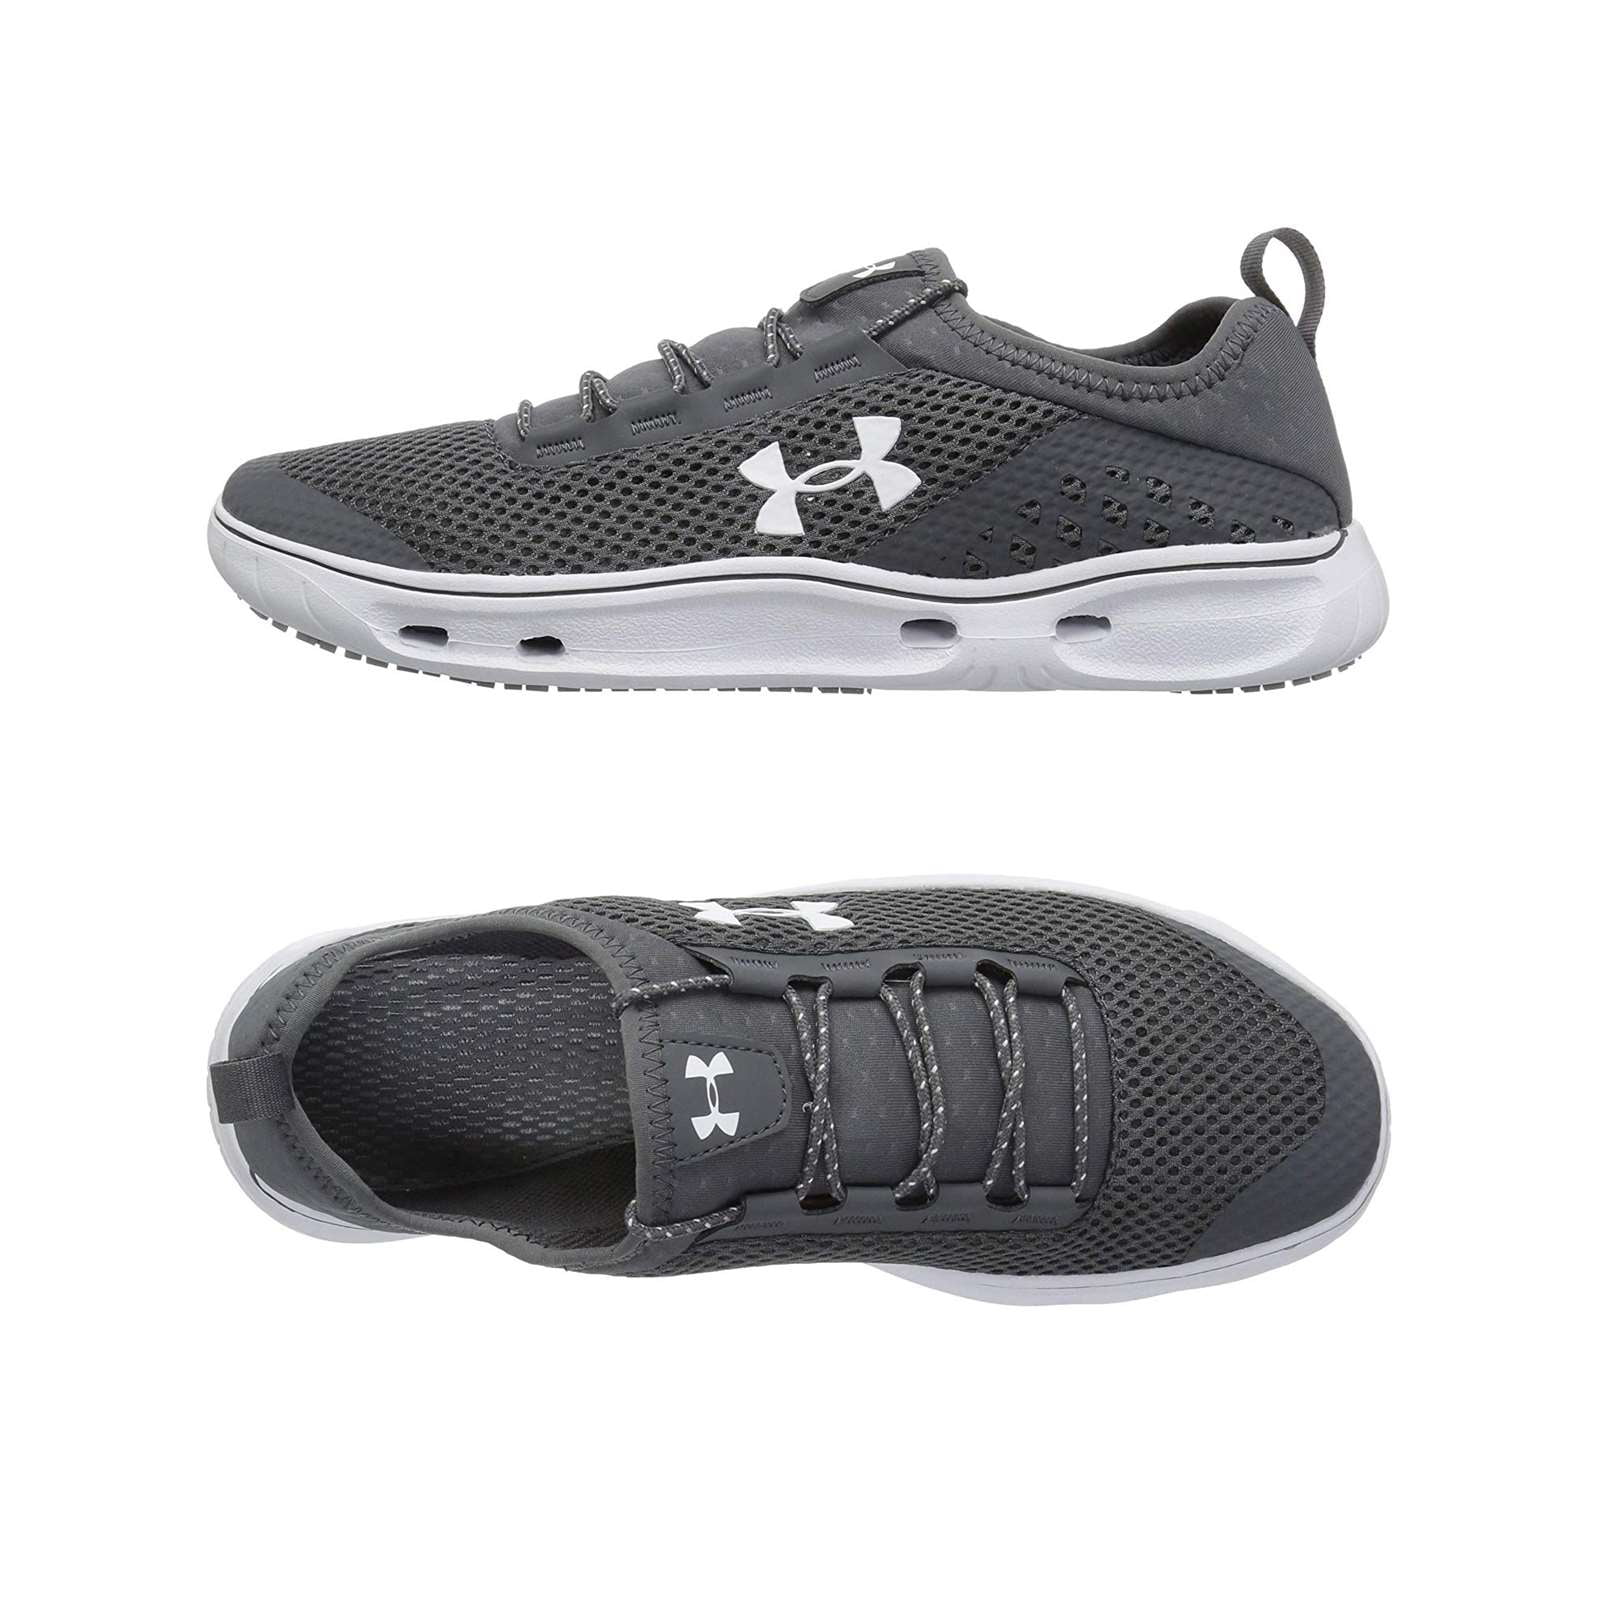 Under Armour Under Armour Women Kilchis Fishing Shoes